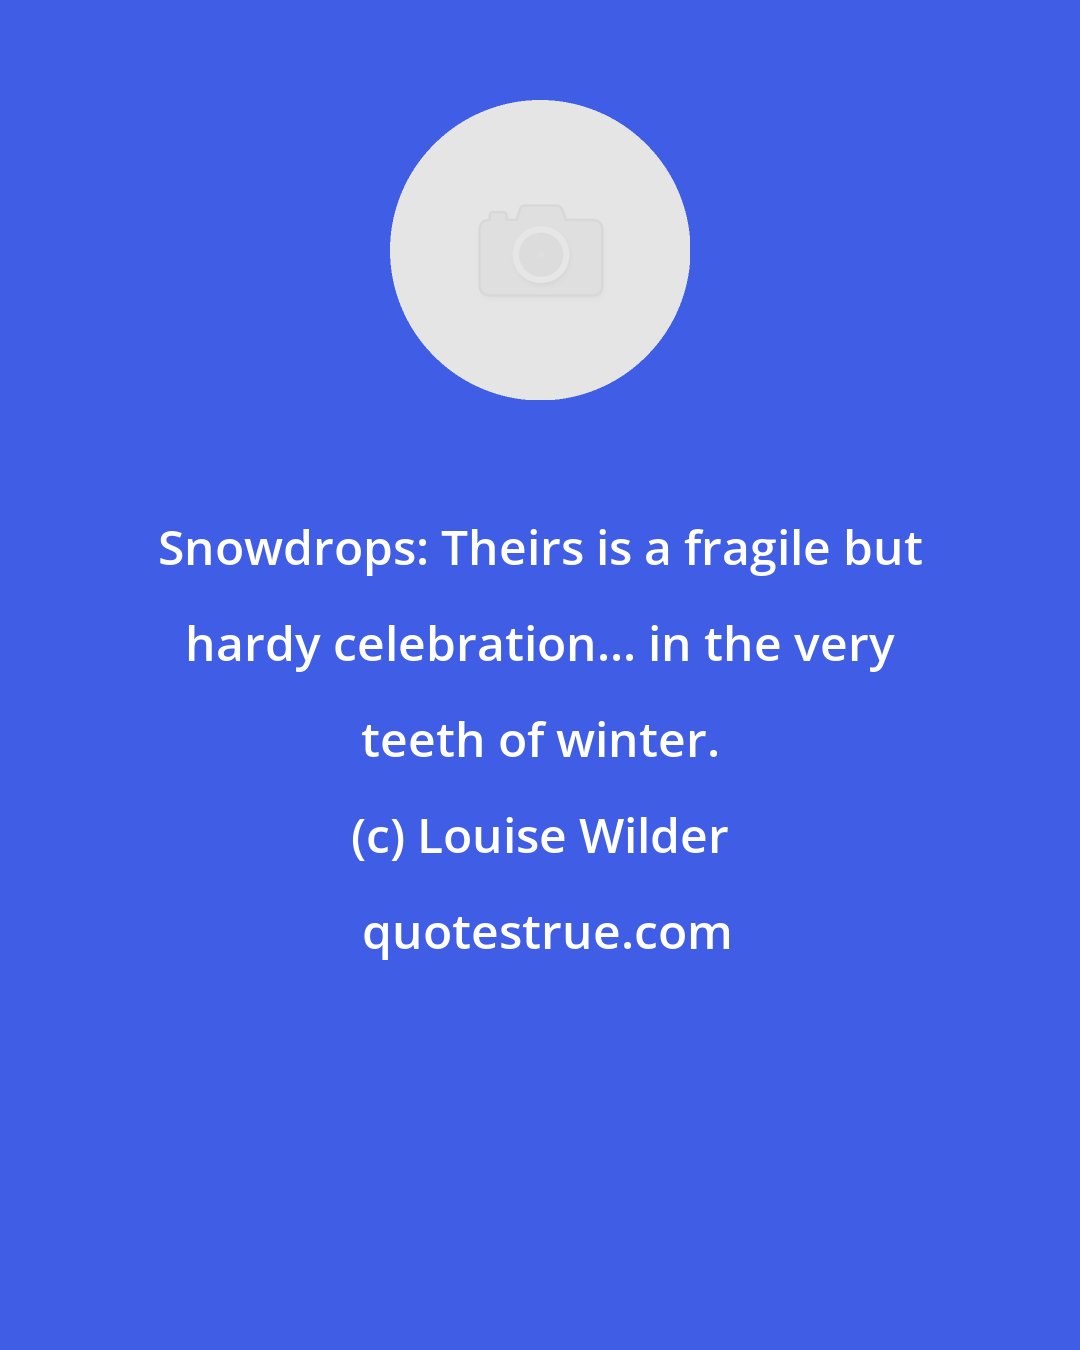 Louise Wilder: Snowdrops: Theirs is a fragile but hardy celebration... in the very teeth of winter.